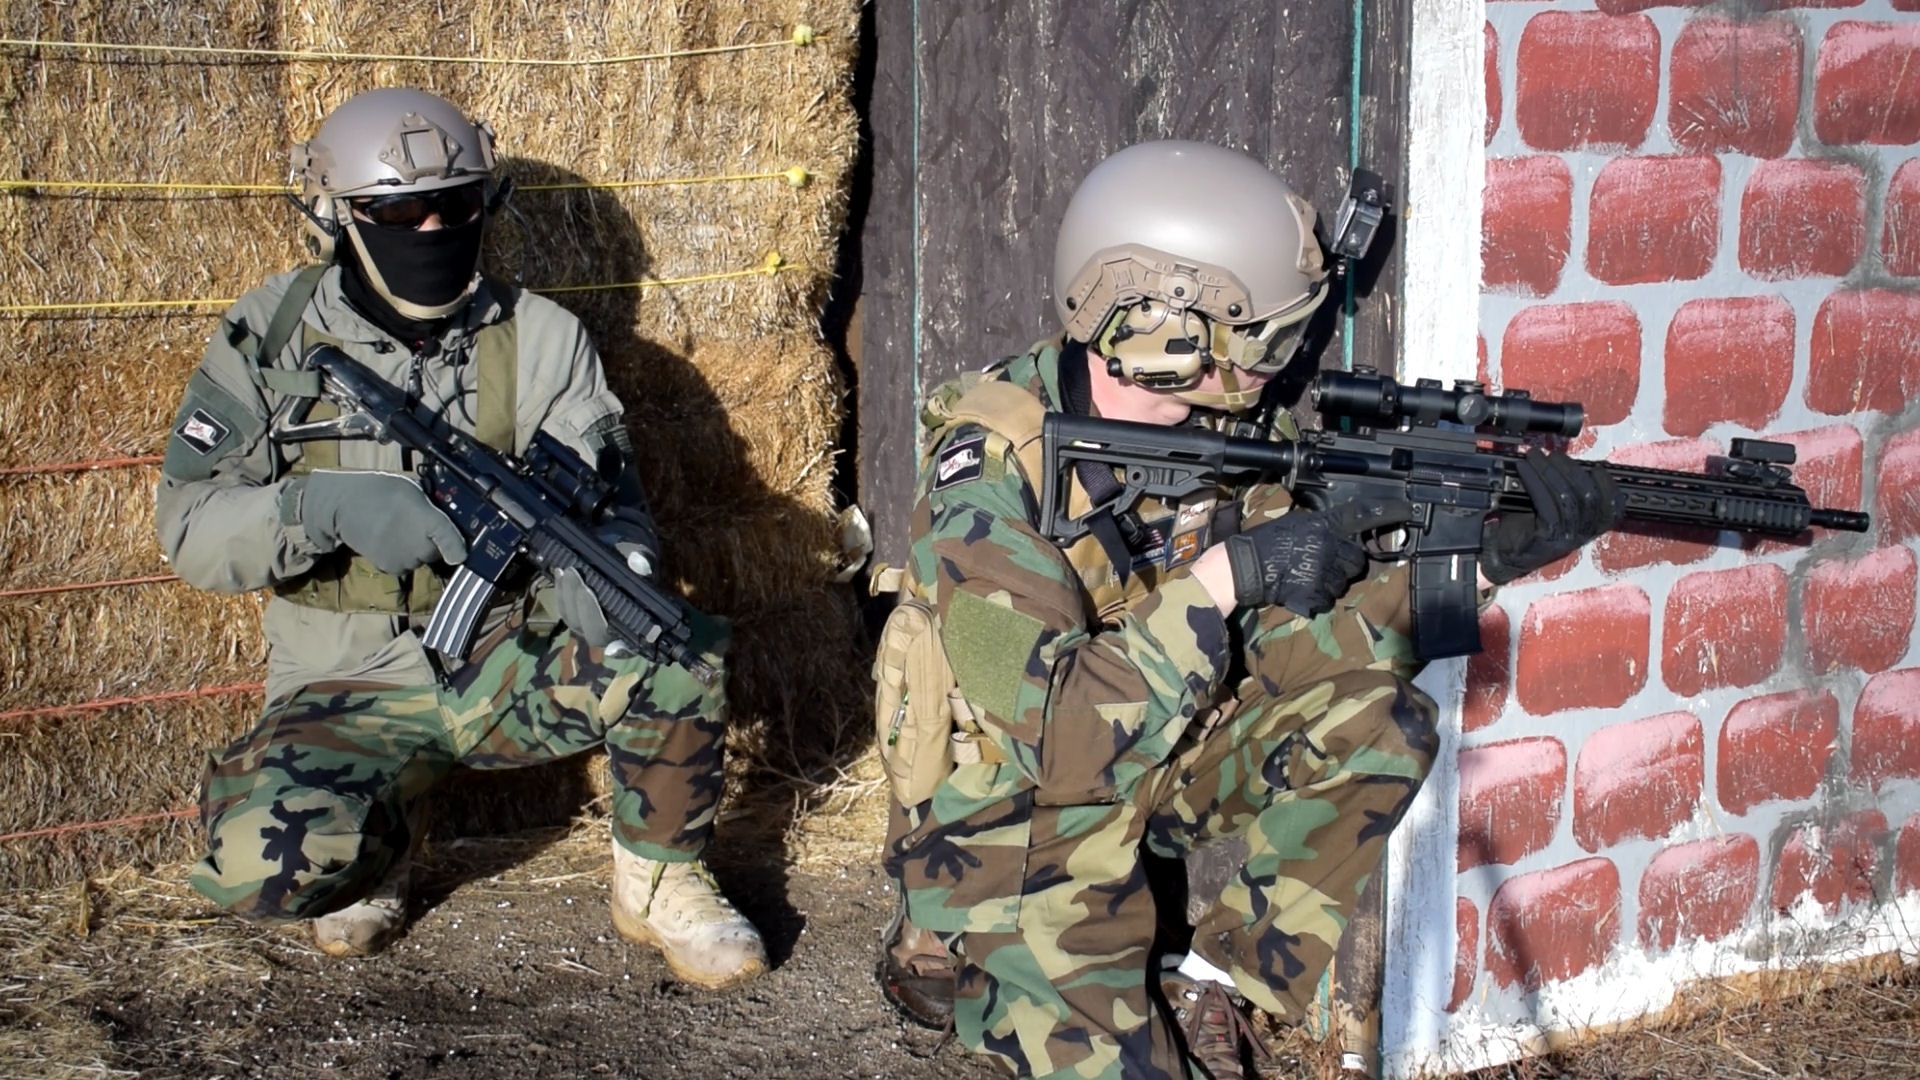 Two airsoft players in tactical gear and helmets taking cover by a corner of a brick wall and hay bales, ready with their rifles for engagement.